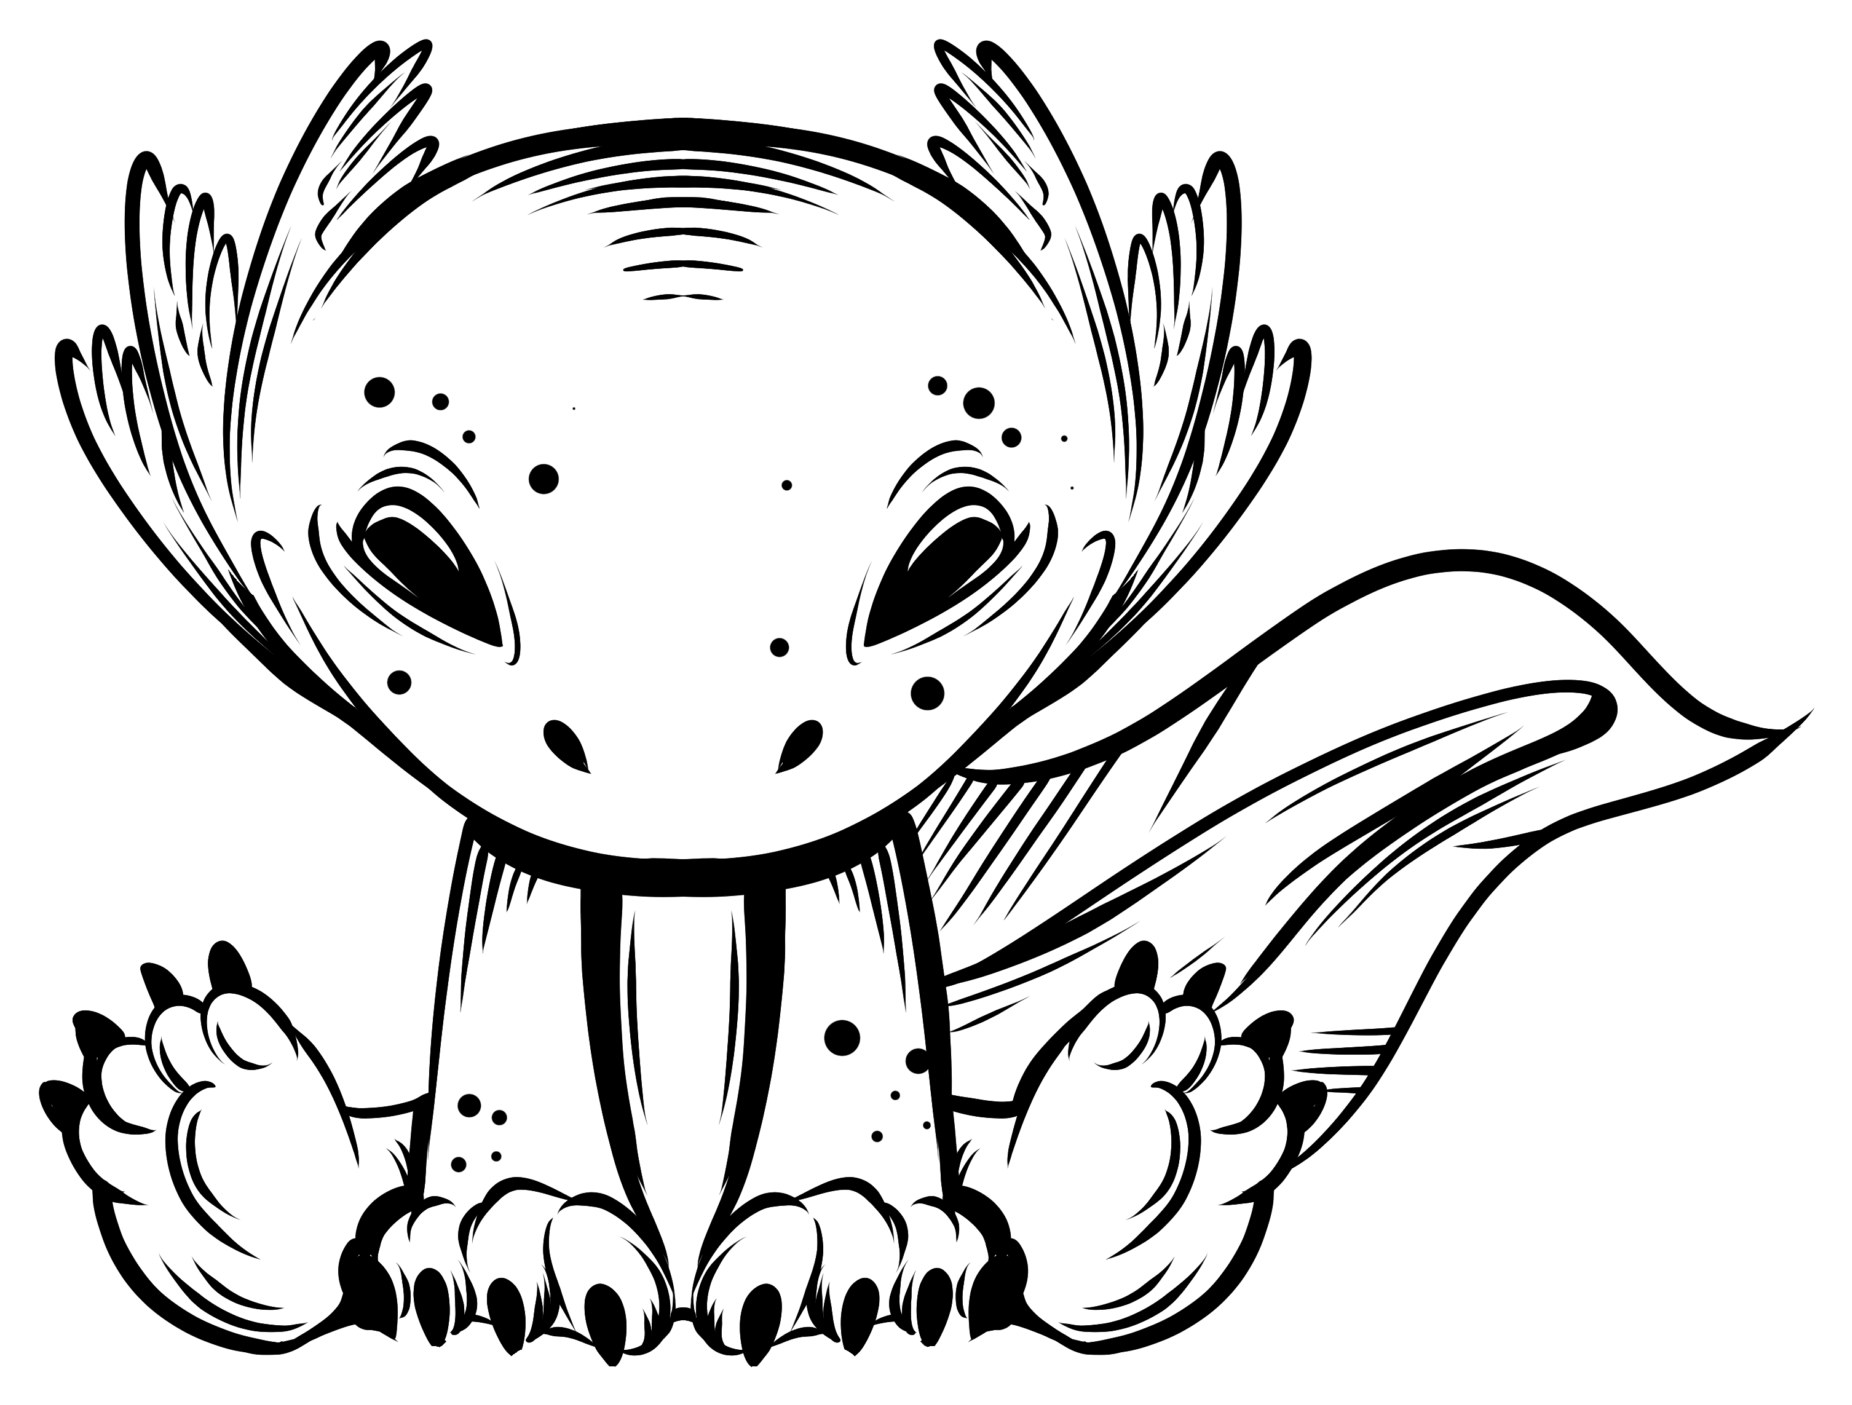 A Very Surprised Axolotl Cartoon Clipart Large Size Png Image Pikpng ...